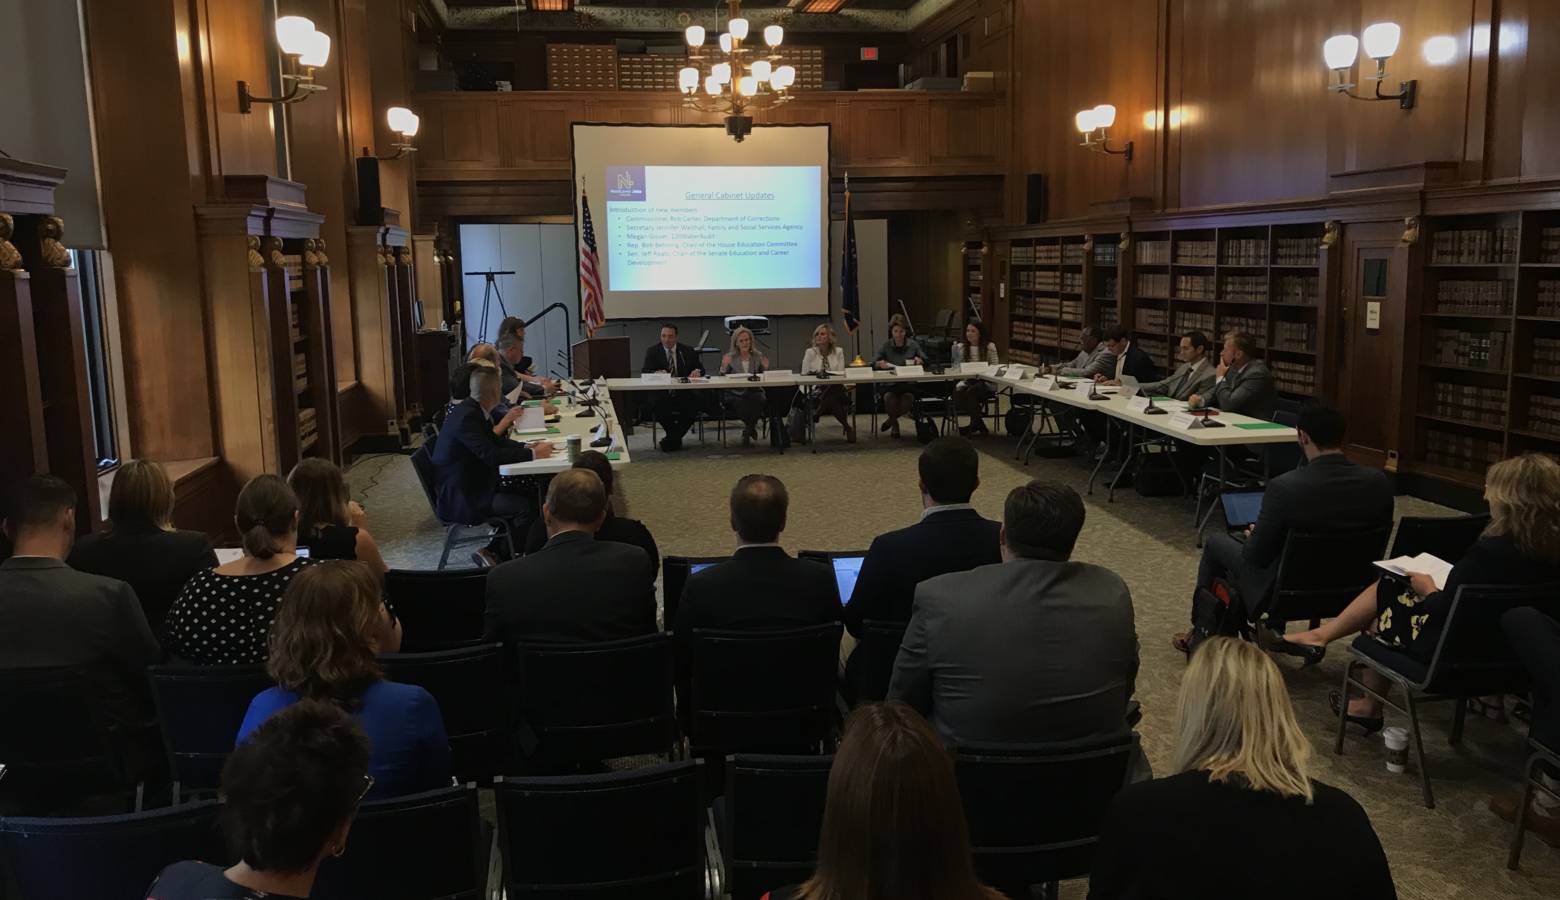 The Governor's Workforce Cabinet voted to reimburse Graduation Alliance for adult education programming on Thursday, Aug. 15. (Justin Hicks/IPB News)